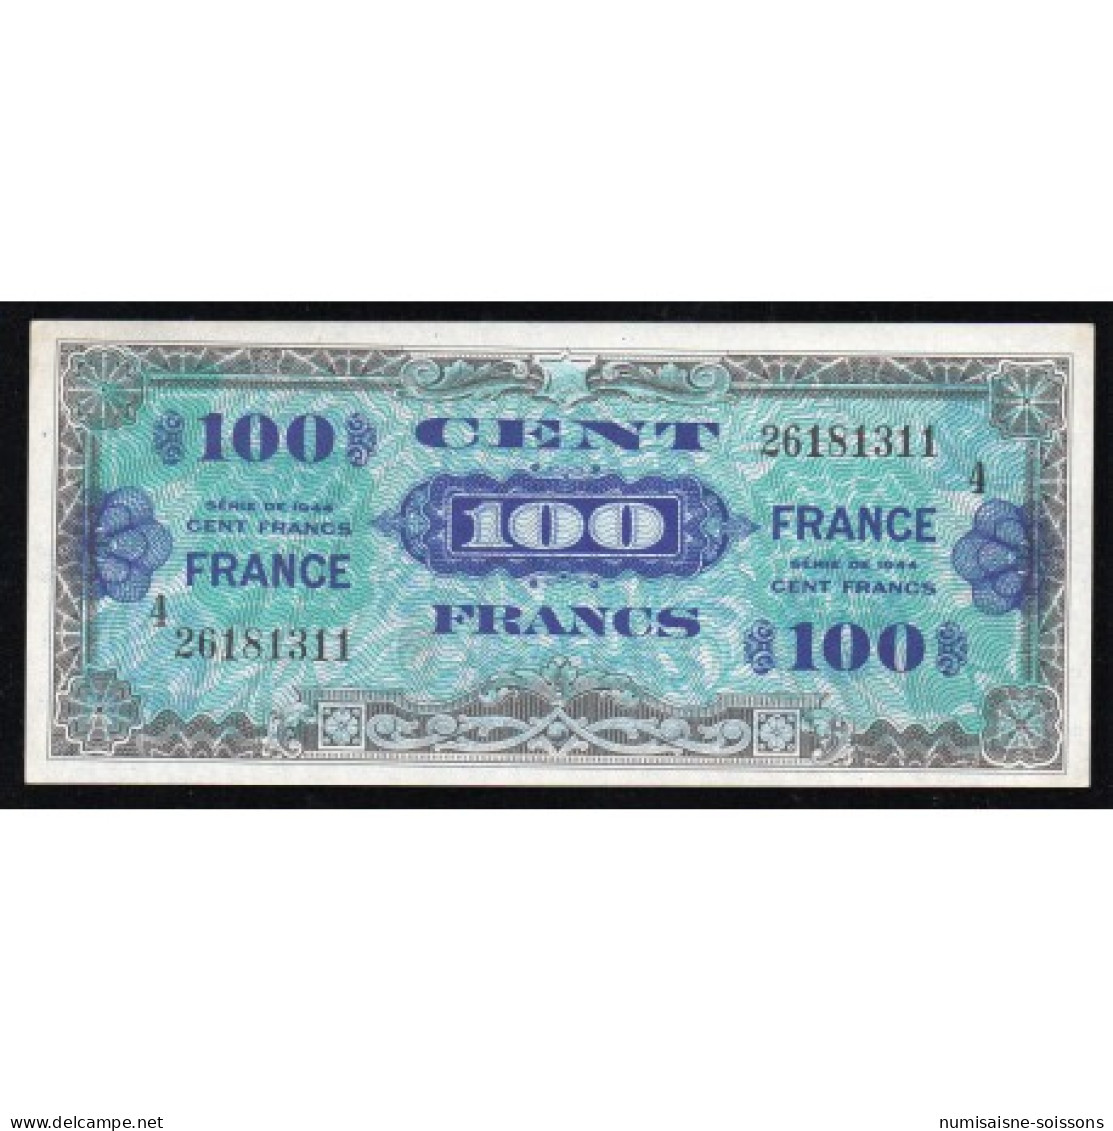 FAY VF 25/4 - 100 FRANCS VERSO FRANCE - 1945 - SERIE 4 - PICK 105s - Ohne Zuordnung